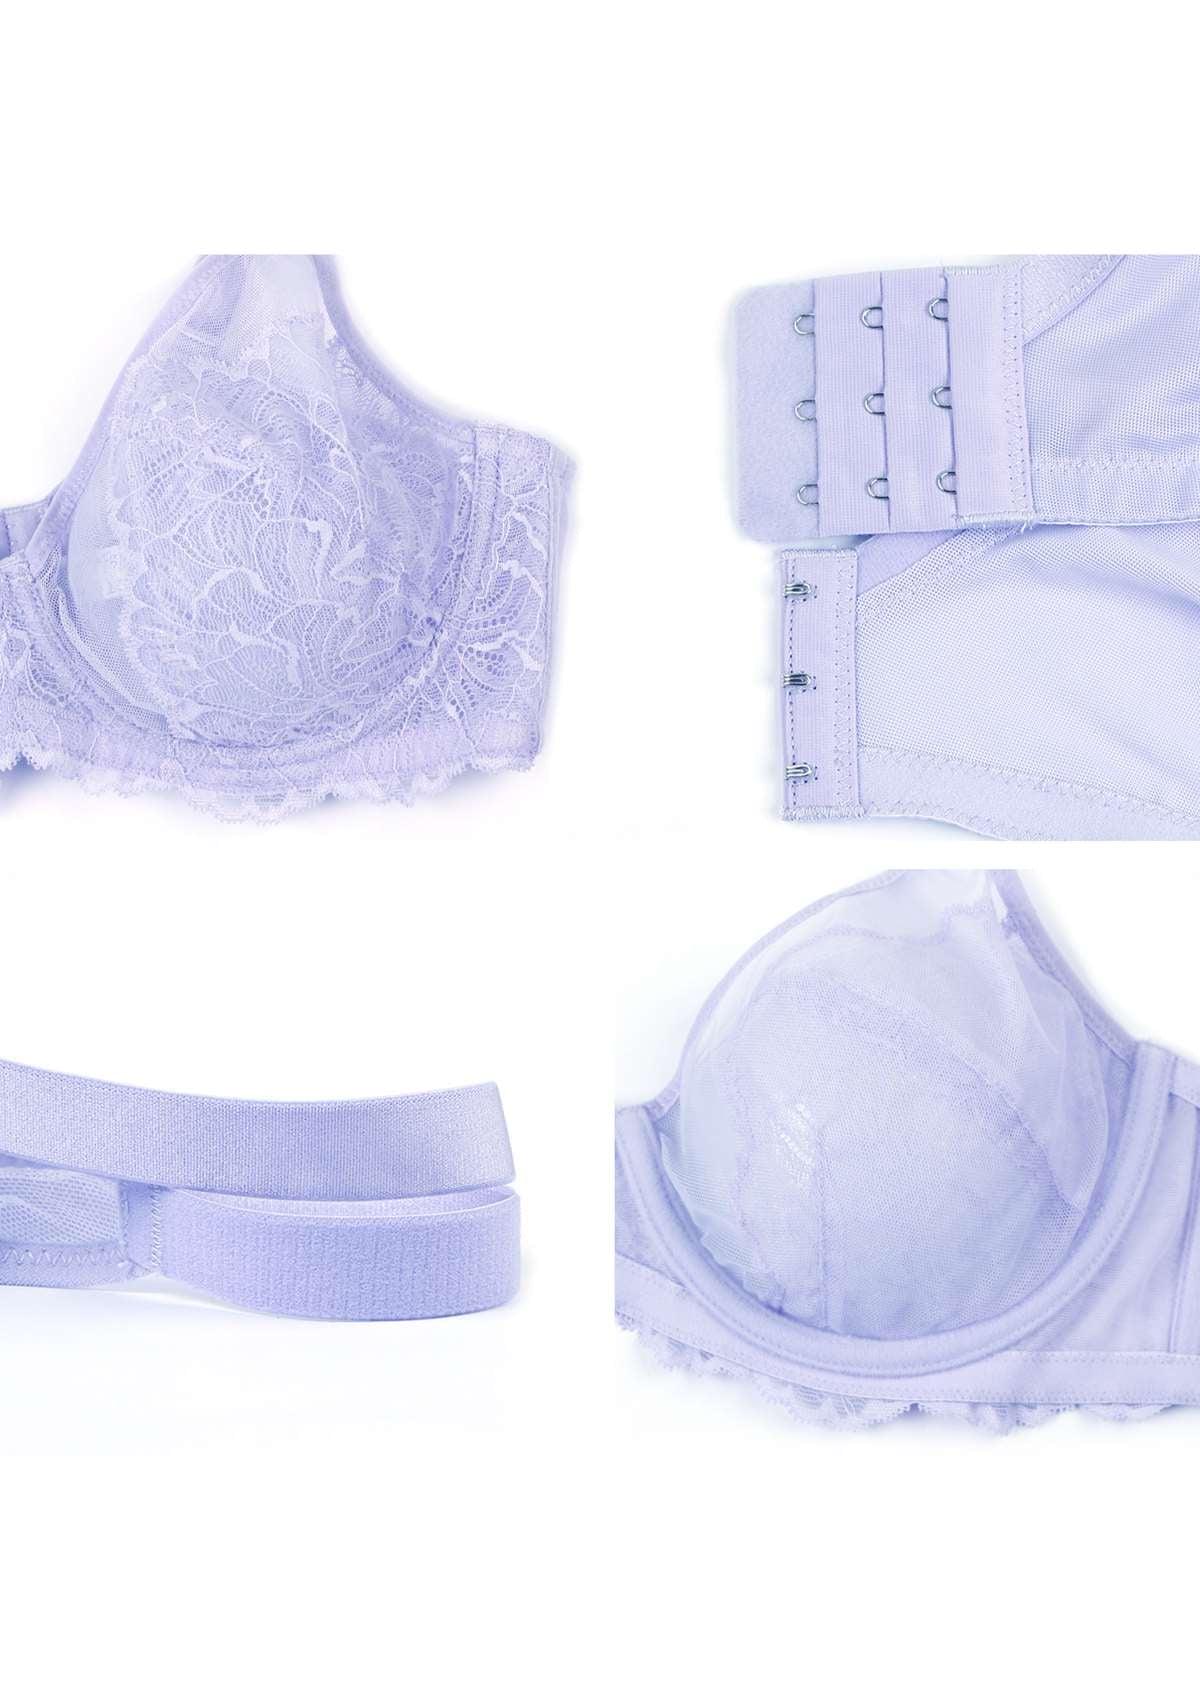 HSIA Blossom Transparent Lace Bra: Plus Size Wired Back Smoothing Bra - Light Purple / 42 / DD/E